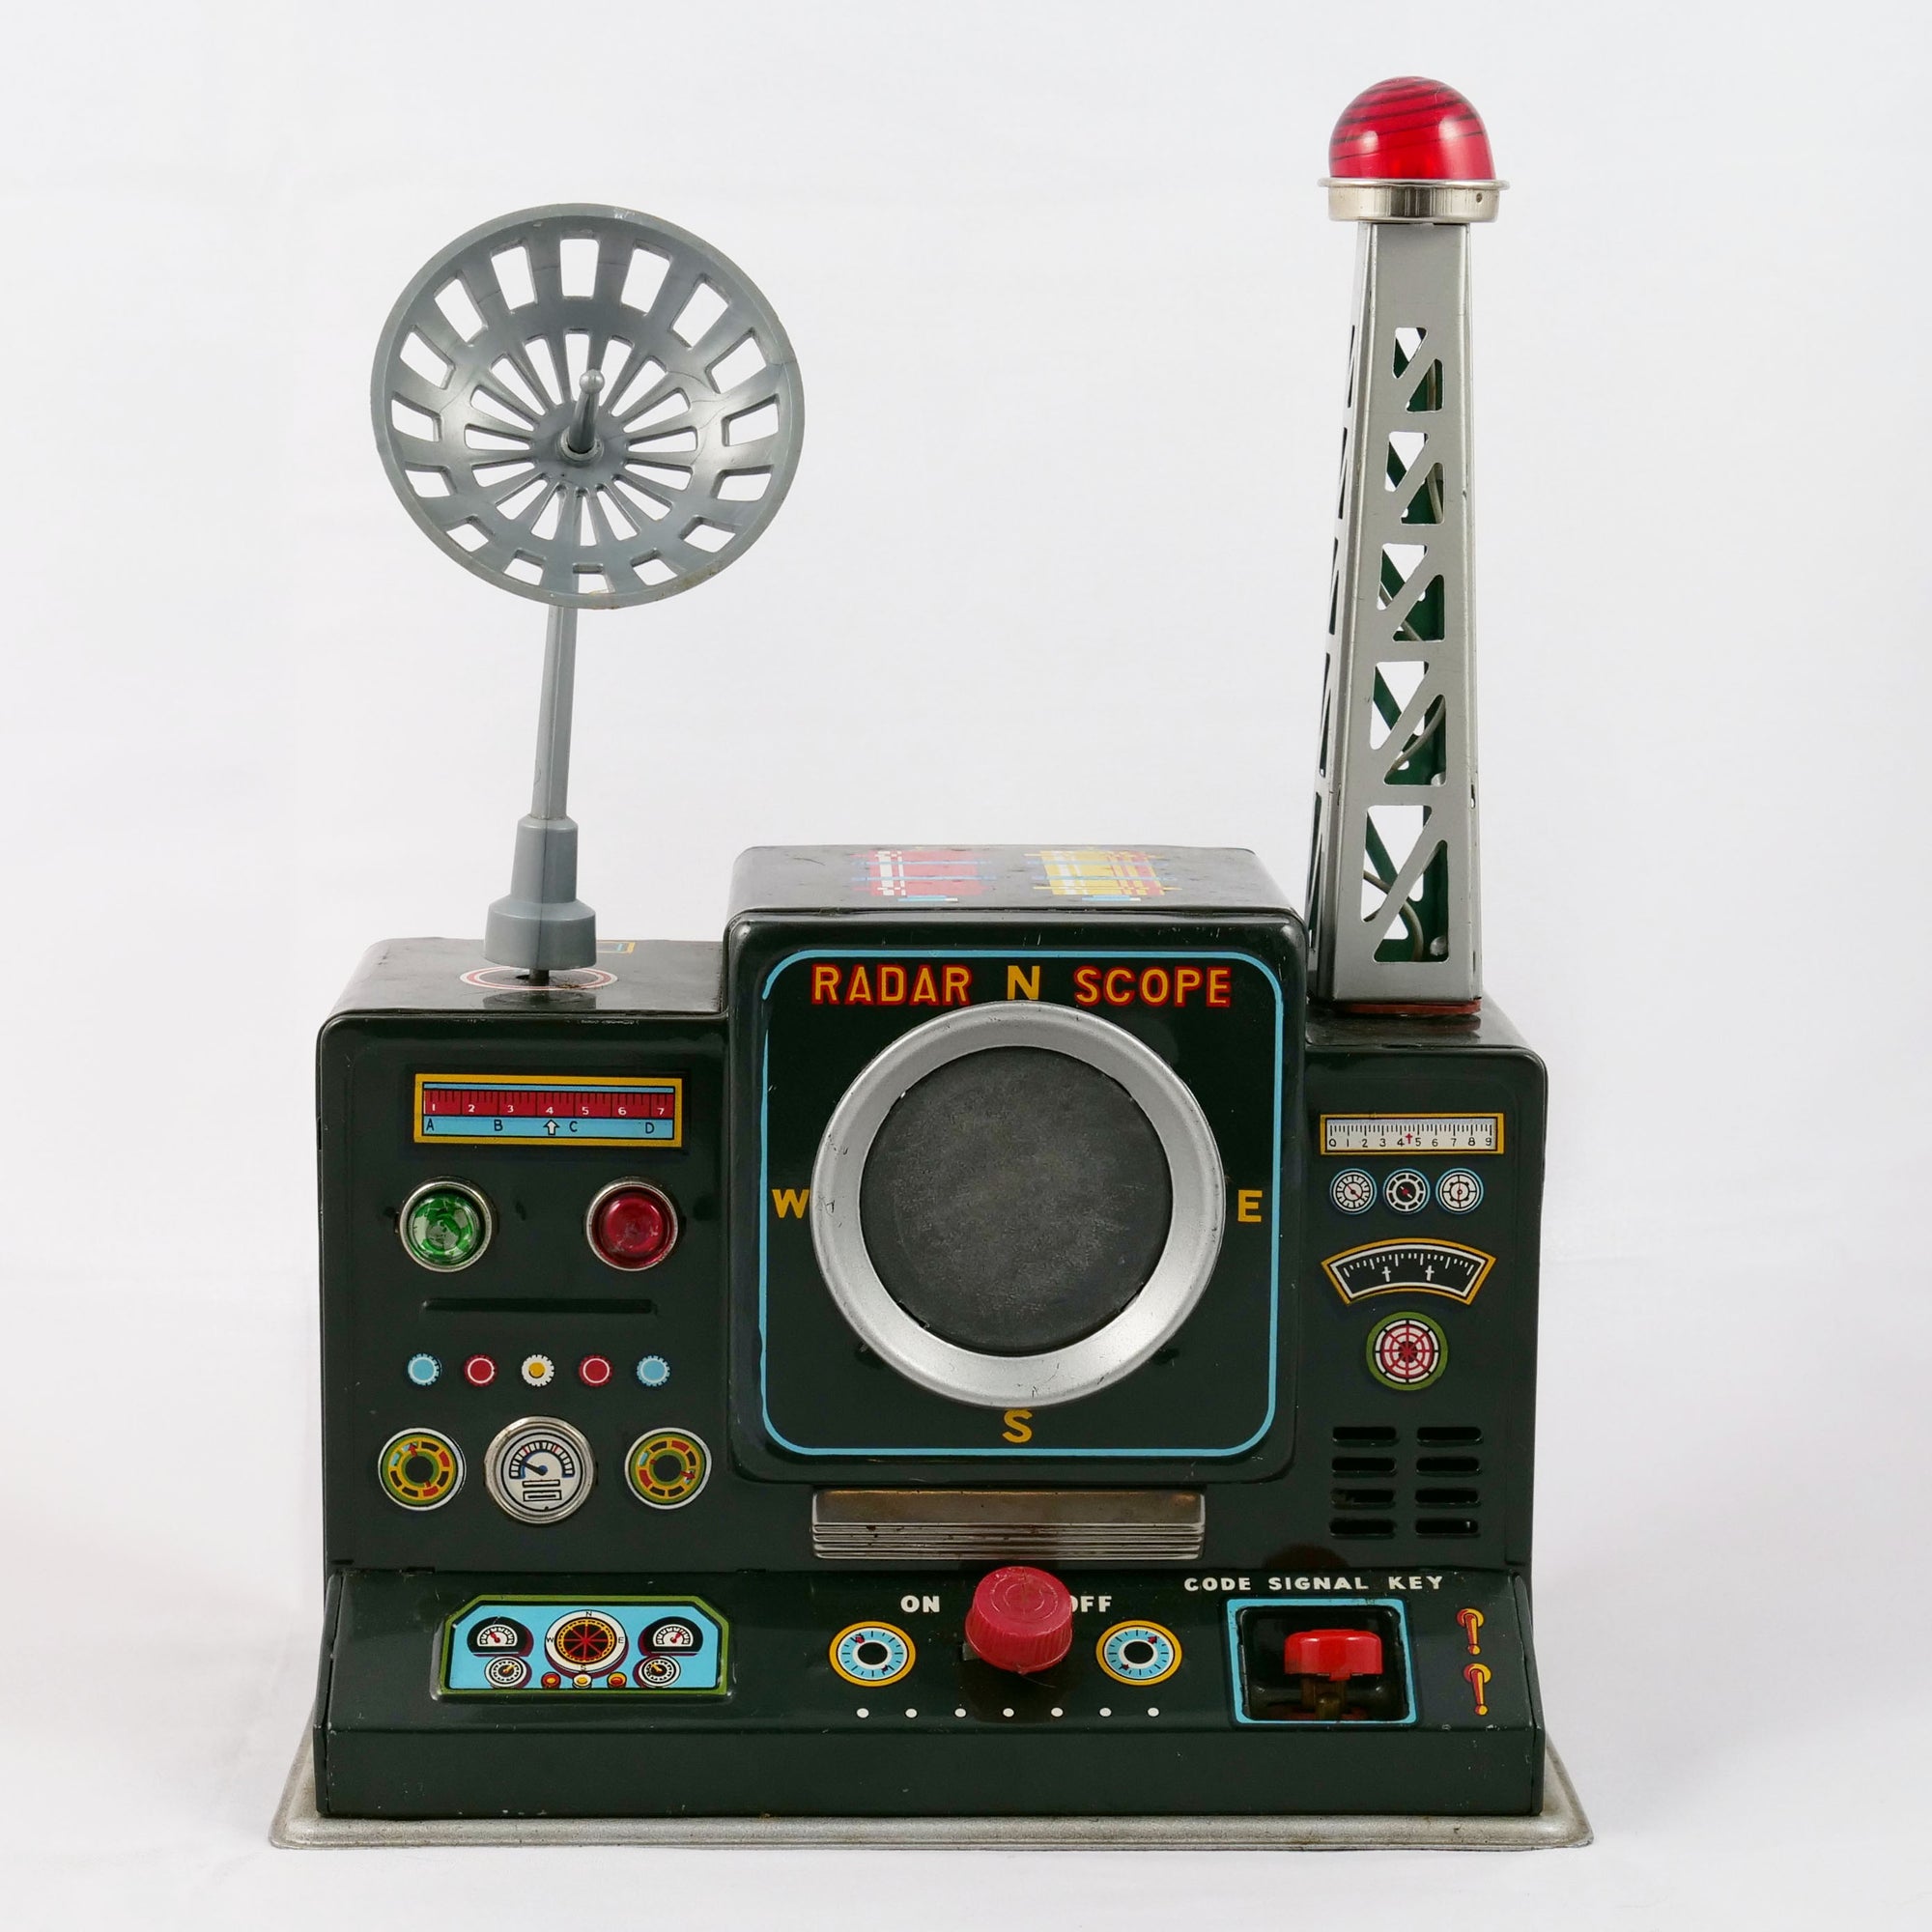 Playing Cold War: A Distant Early Warning Radar Station Toy by Masudaya